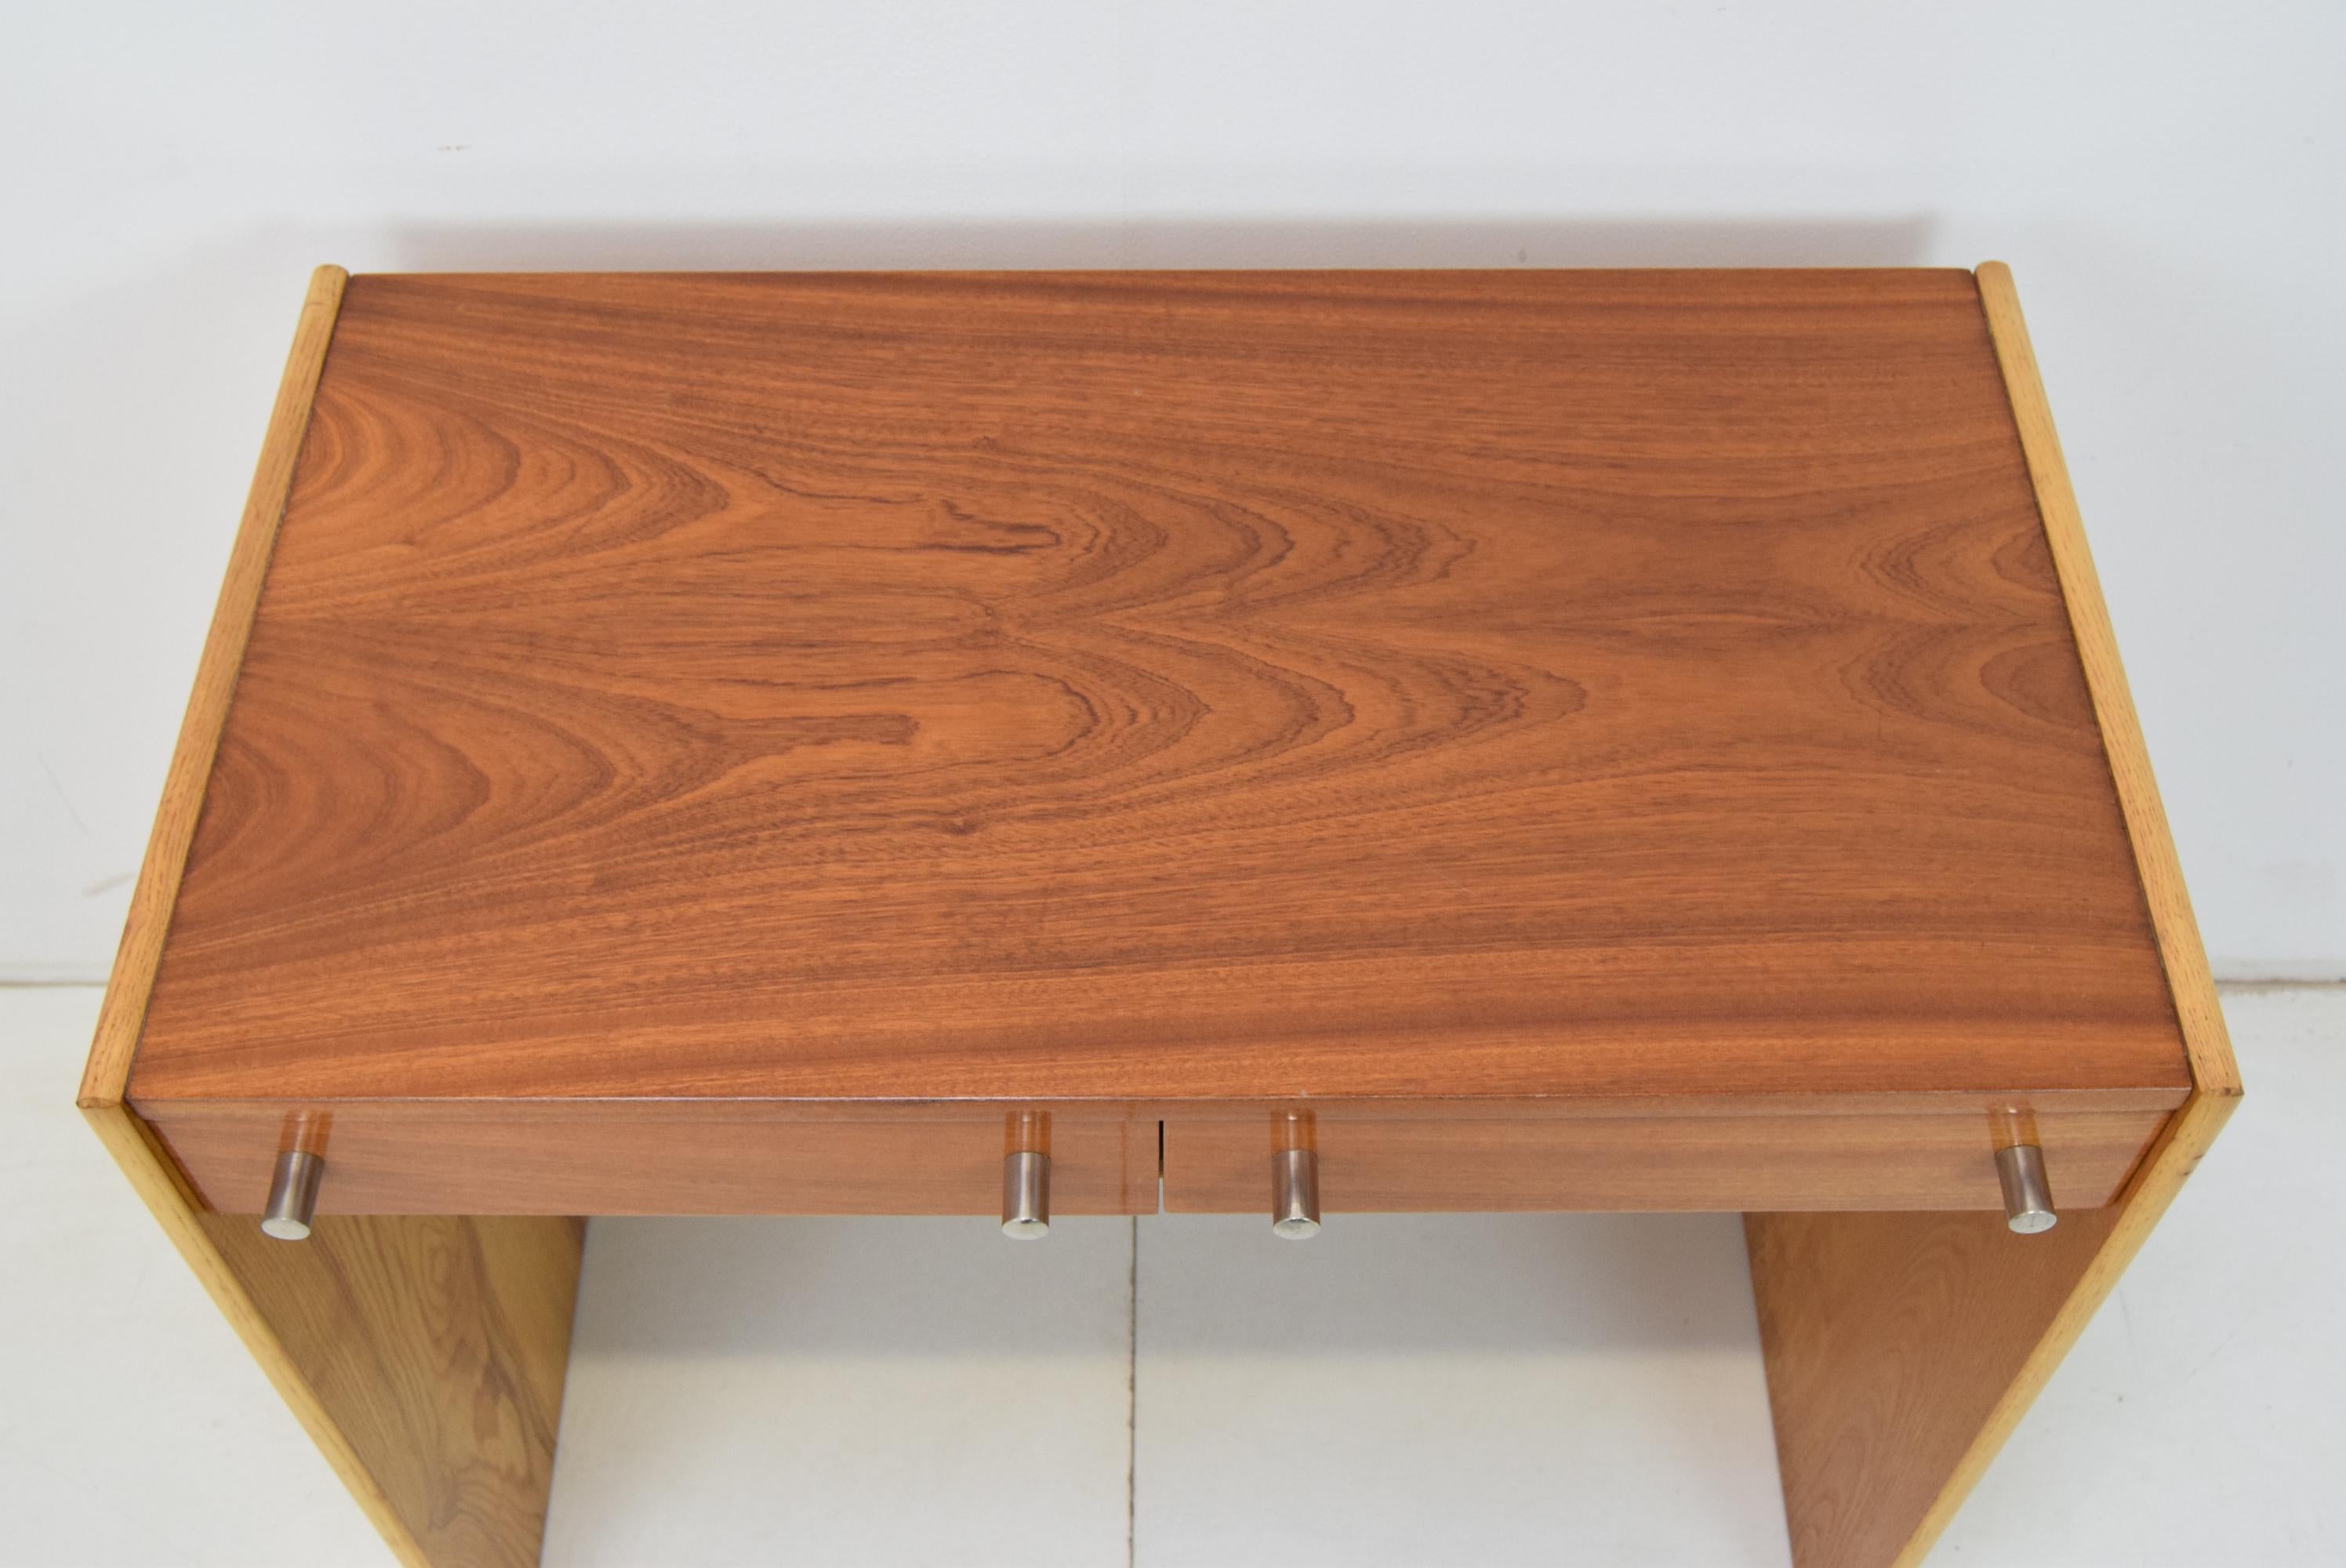 Metal Lady's Desk or Vanity or Side Table in Mahogany / Up Zavody, 1970s For Sale